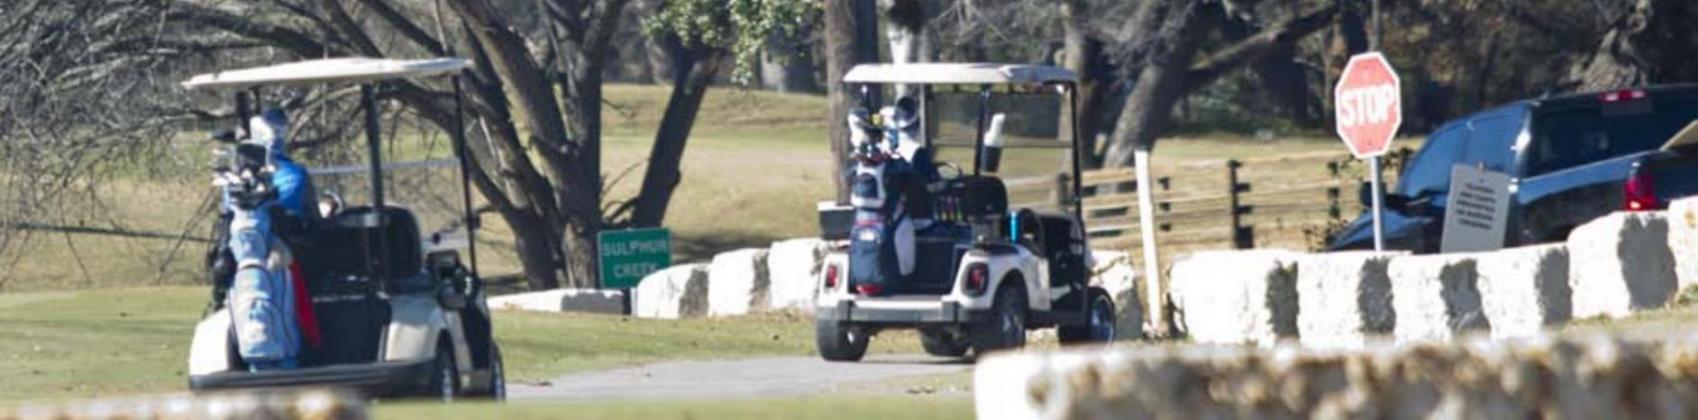 Golf cart drivers at Hancock Park Golf Course prepare to cross Naruna Road. A city ordinance stipulates that licensed drivers may operate golf carts on public roadways only to travel to and from cemeteries and the golf course. JEFF LOWE | DISPATCH RECORD